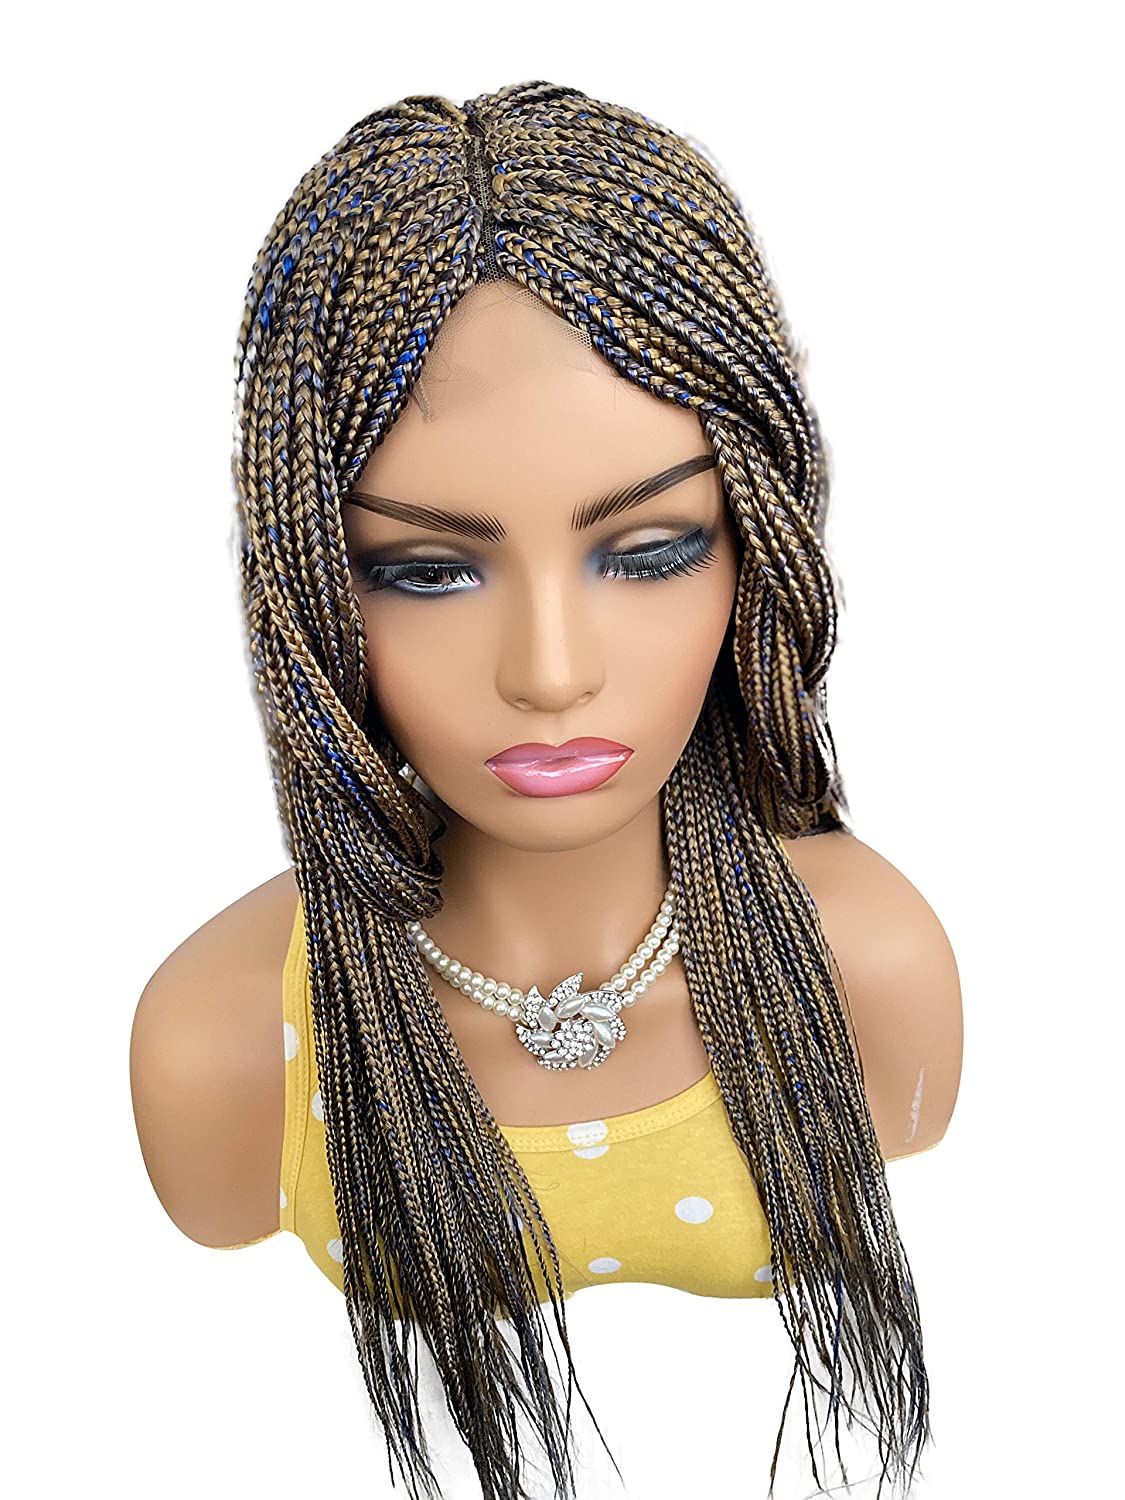 Price:$134.99     JBG SERVICES Micro Braided Wigs - Handmade Box Braiding Wigs for African American Women - Synthetic Braids With Lace Closure Finishing For Natural-Look - Color Light Blue/27 Mixed 22 inch   Beauty